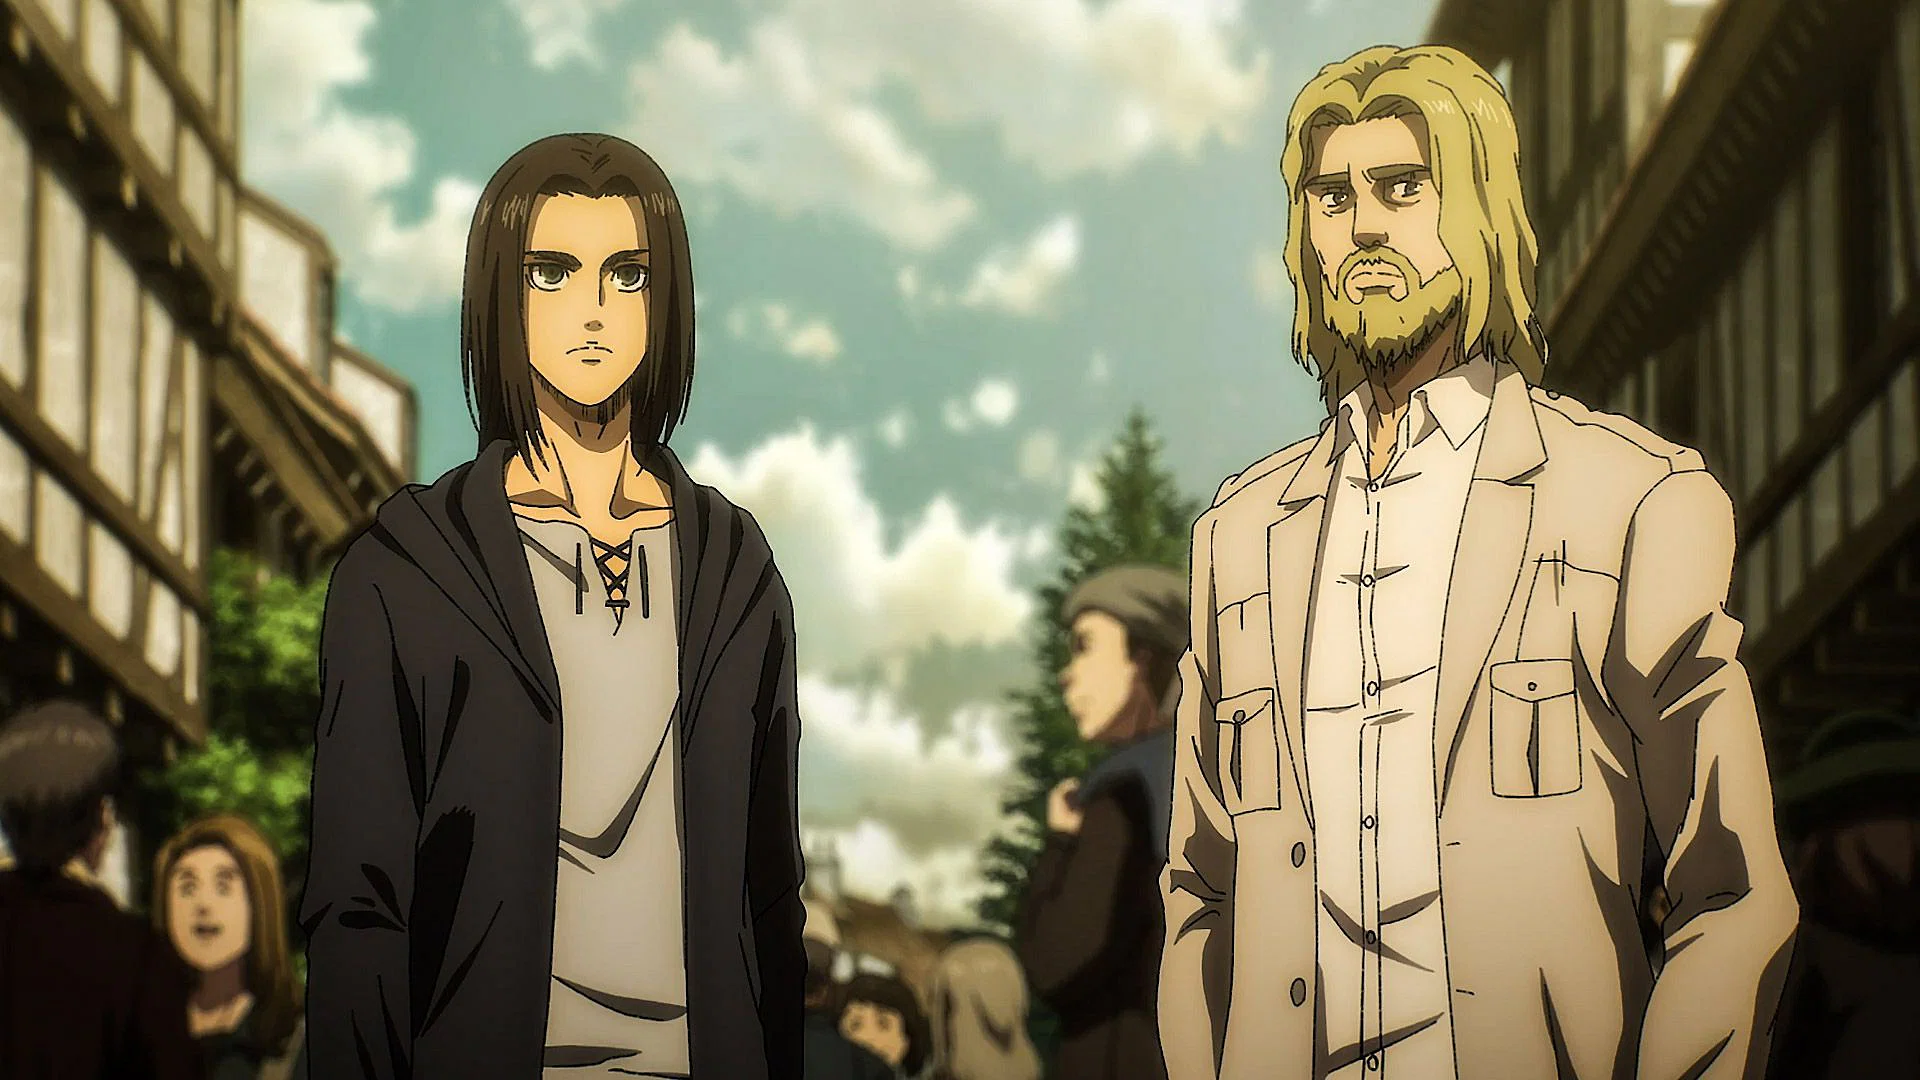 Zeke Yeager is the older brother to Eren